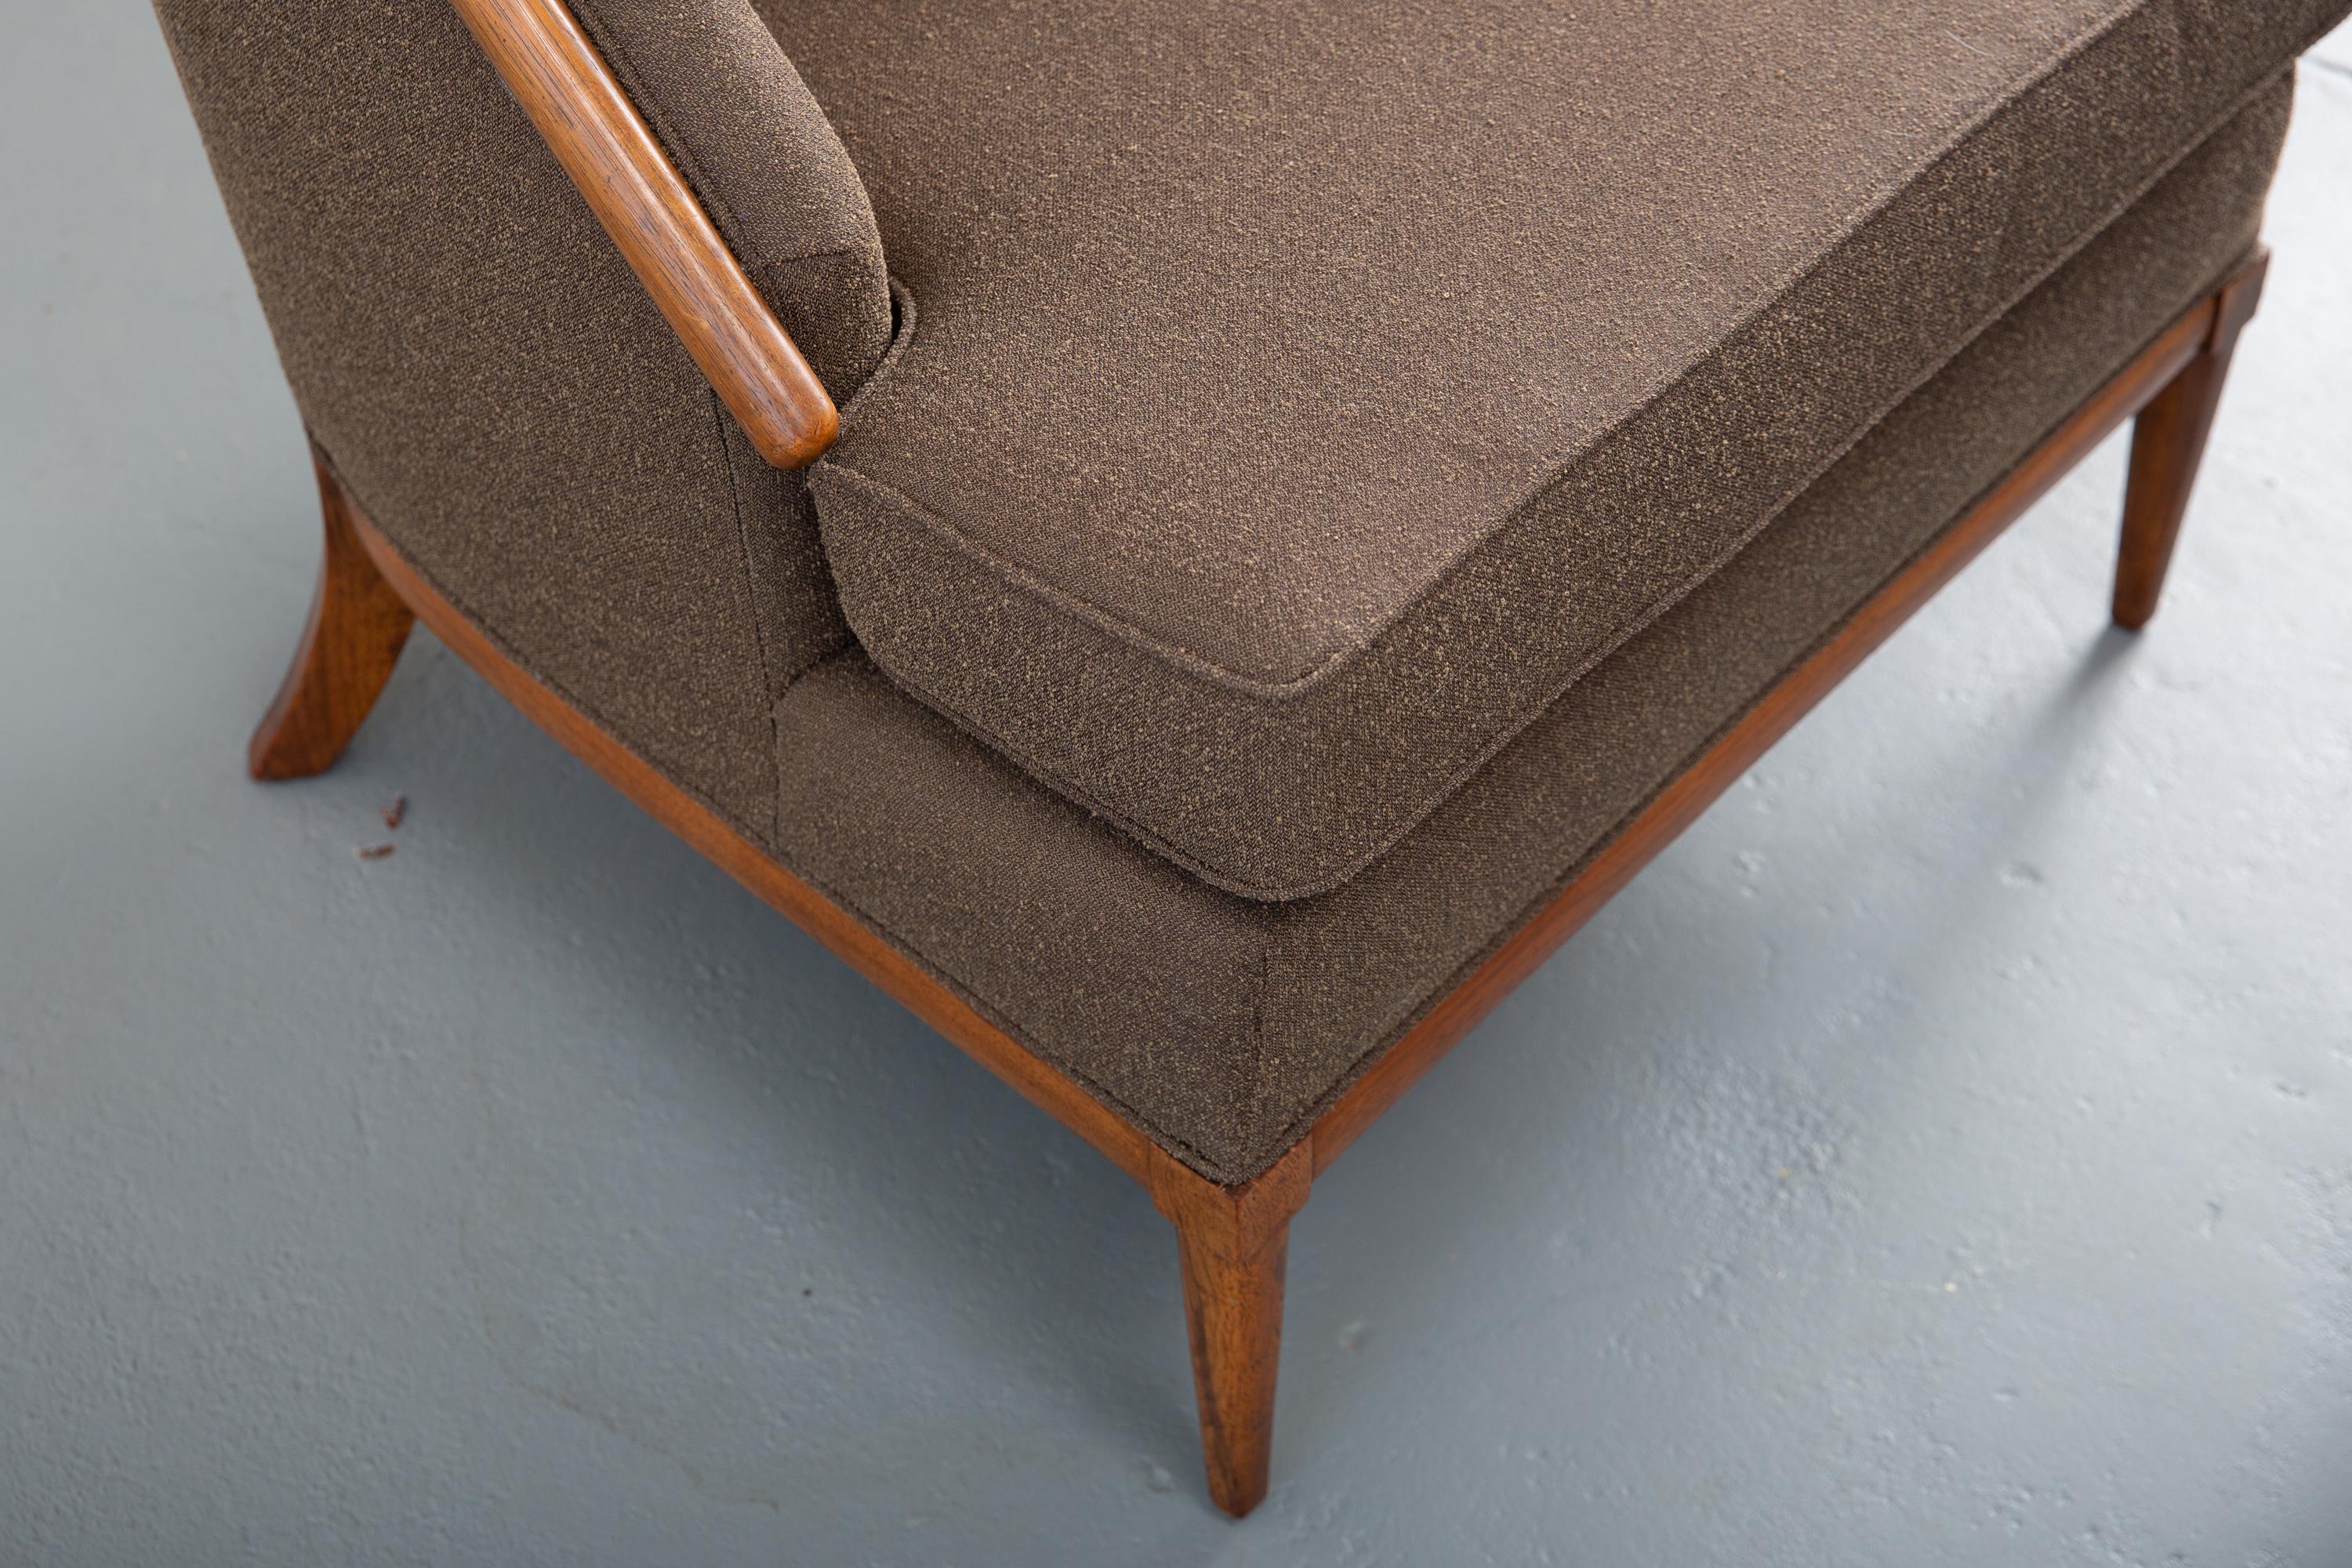 Newly Upholstered Mid-Century Modern Lounge Chair Attributed to Widdicomb 1